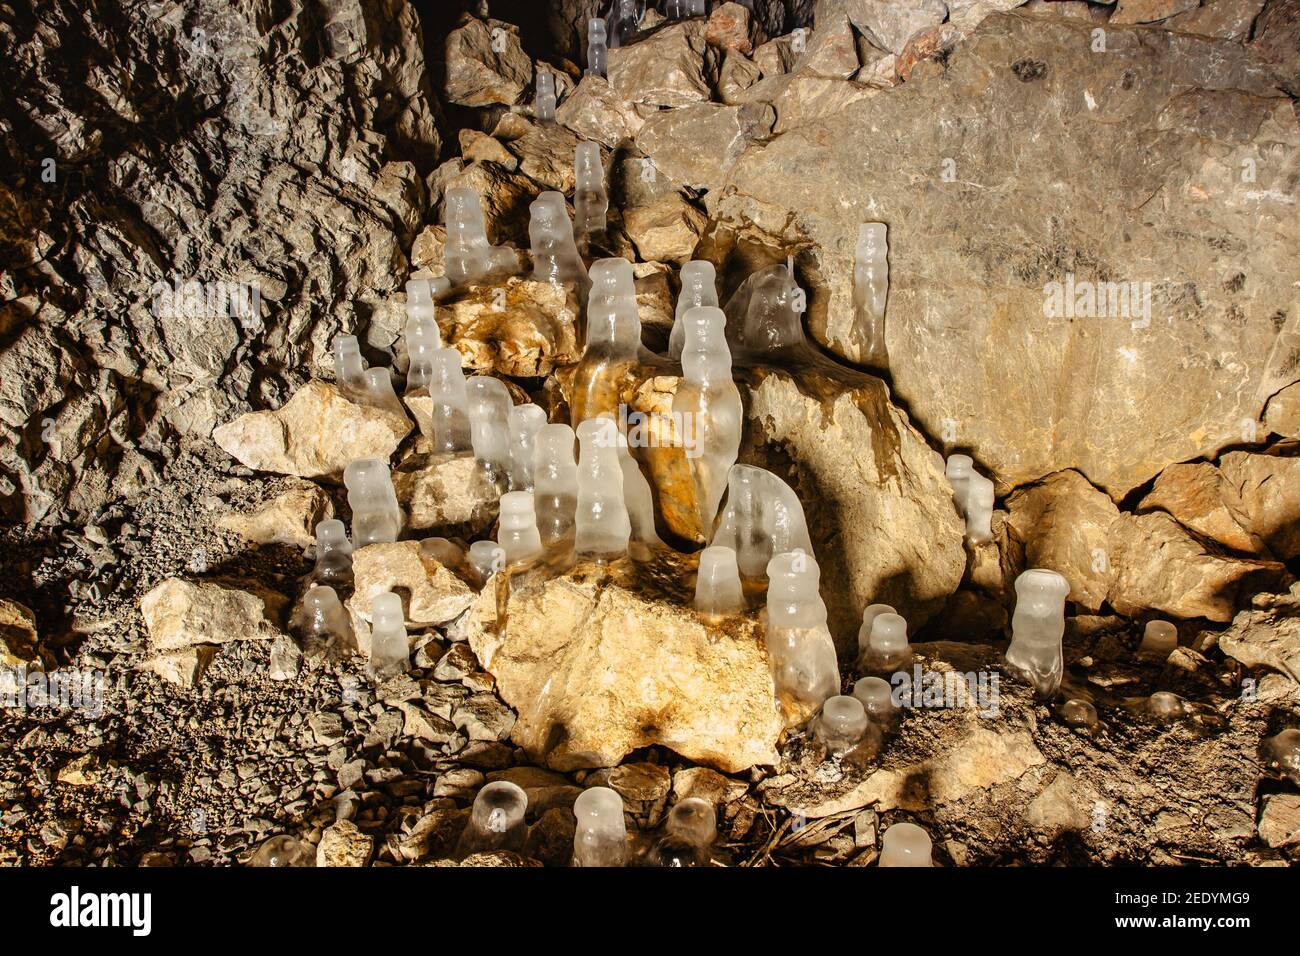 Fascinating ice formations and icicles in Chlum limestone quarry and caves,Czech Republic.Cave system in Cesky kras, Czech Karst.Freezing day outdoors Stock Photo